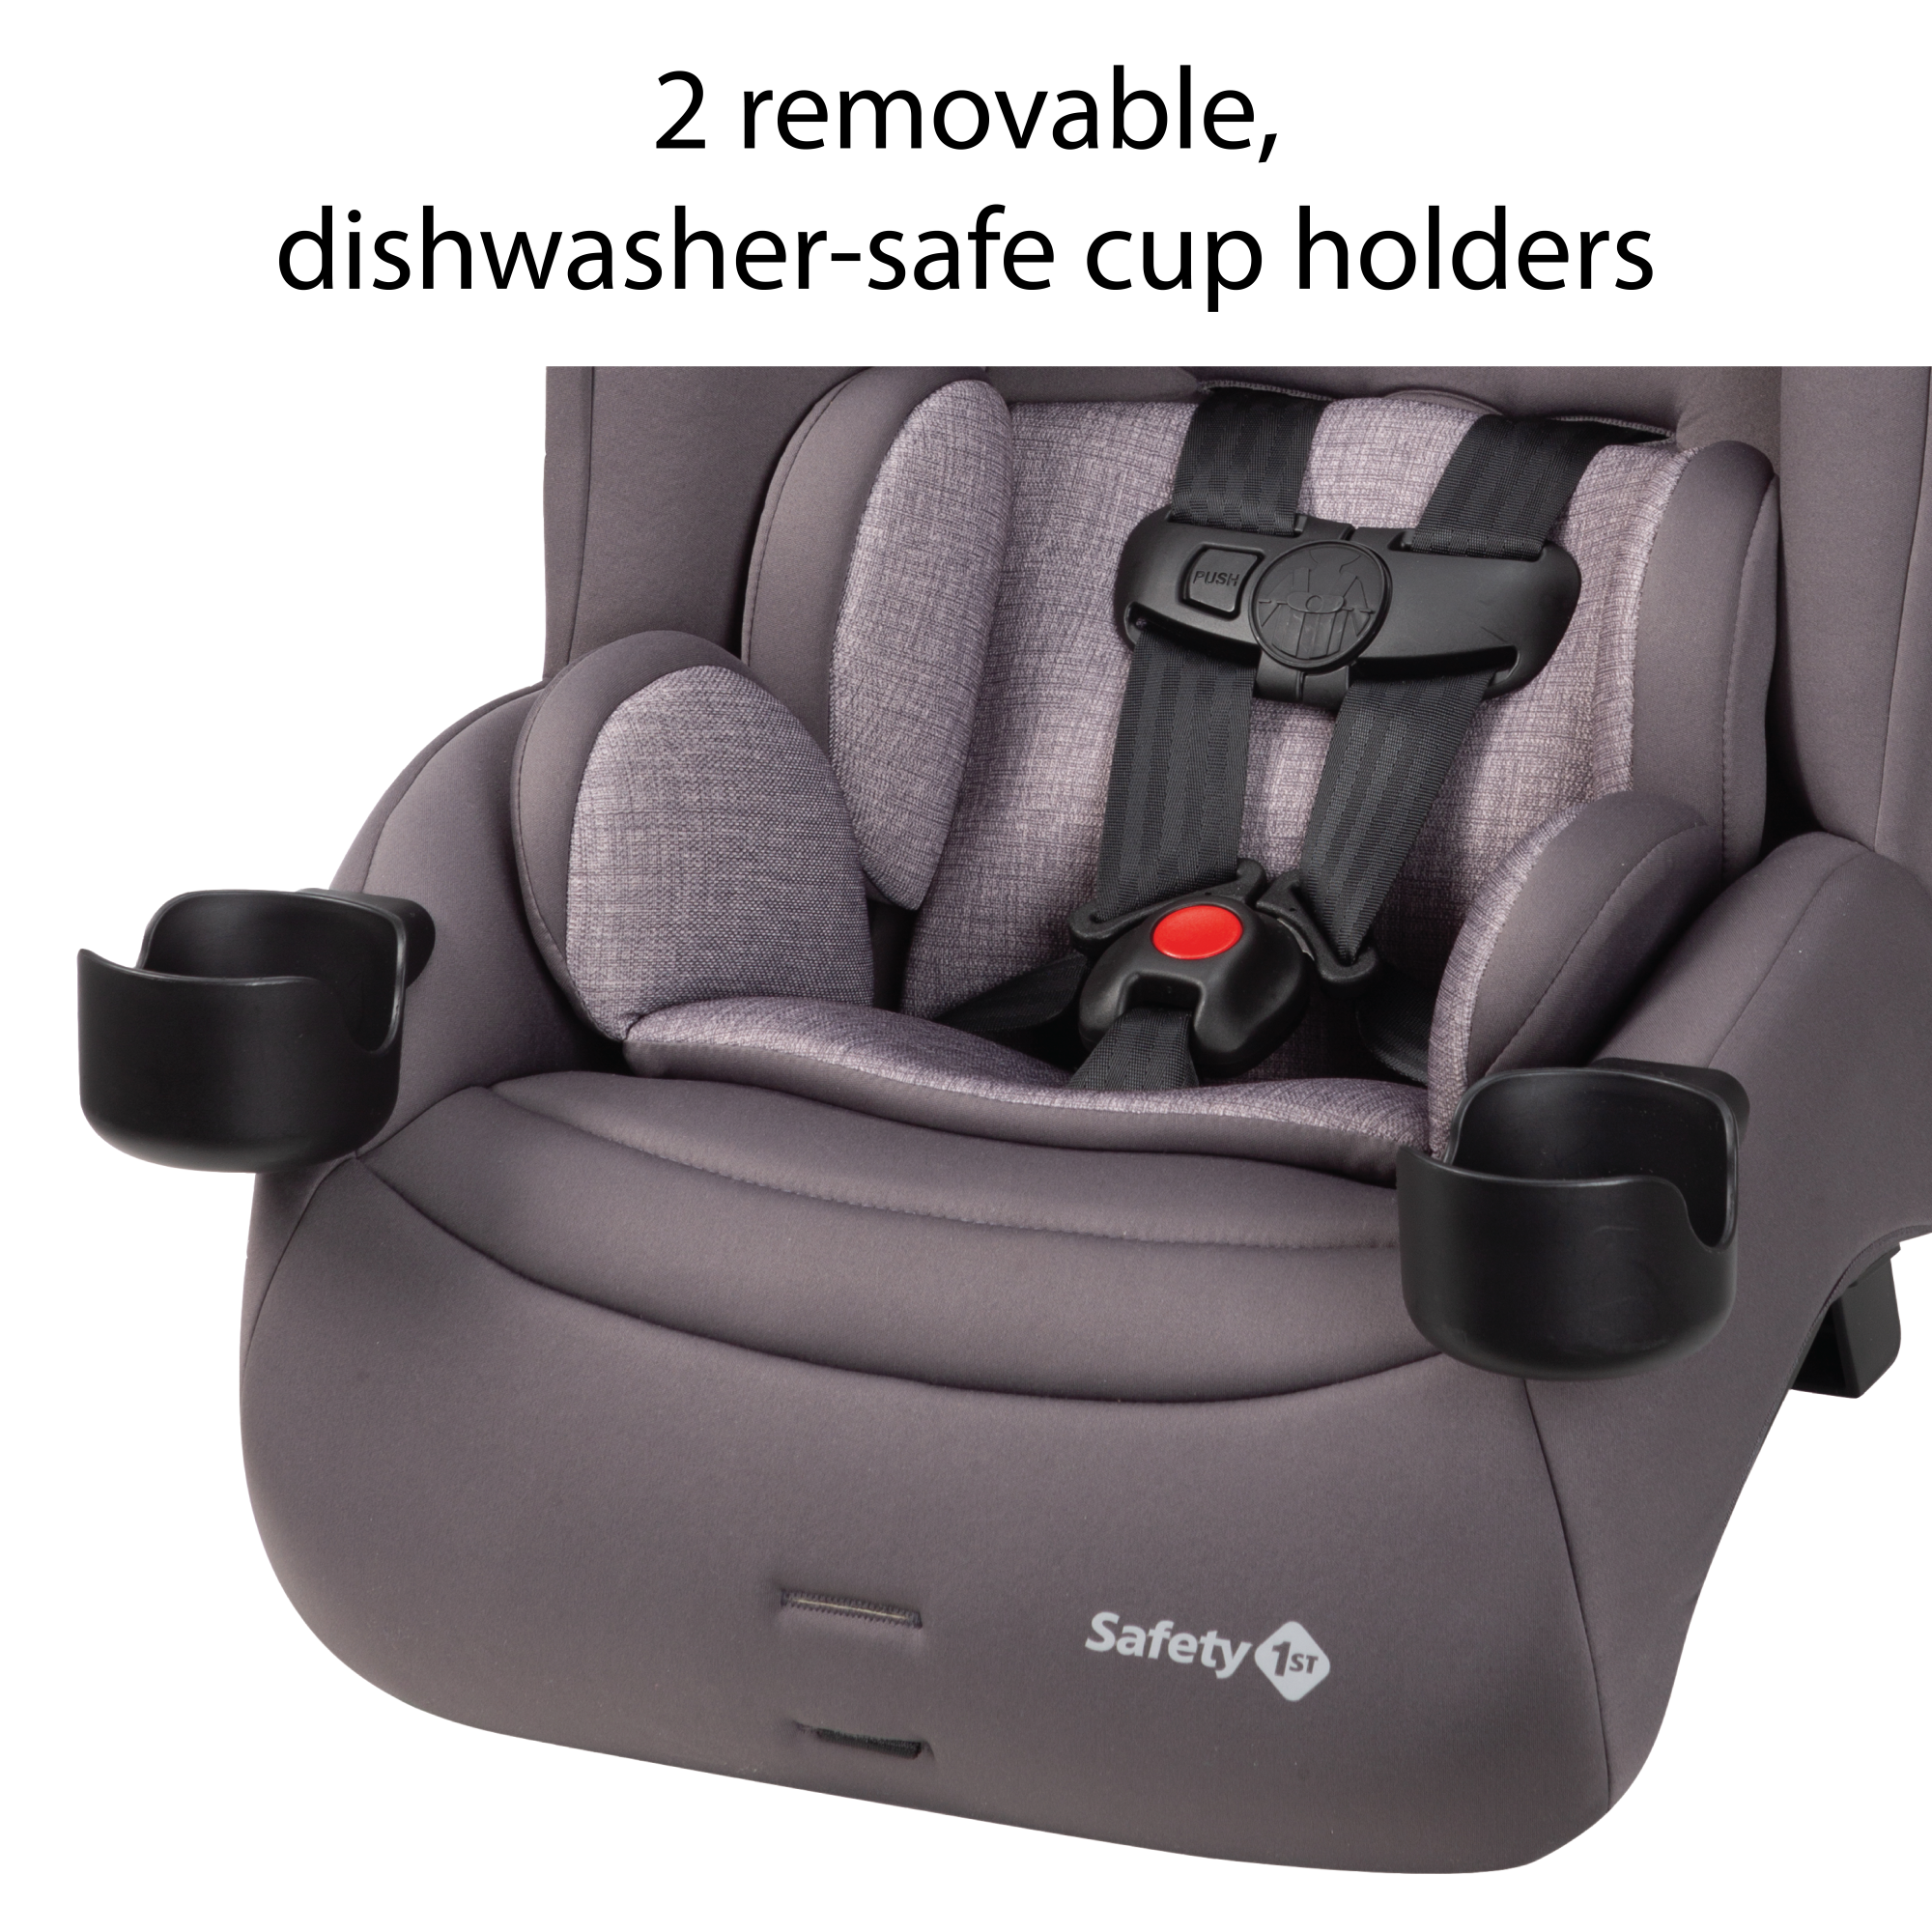 Jive 2-in-1 Convertible Car Seat - 2 removable, dishwasher-safe cup holders